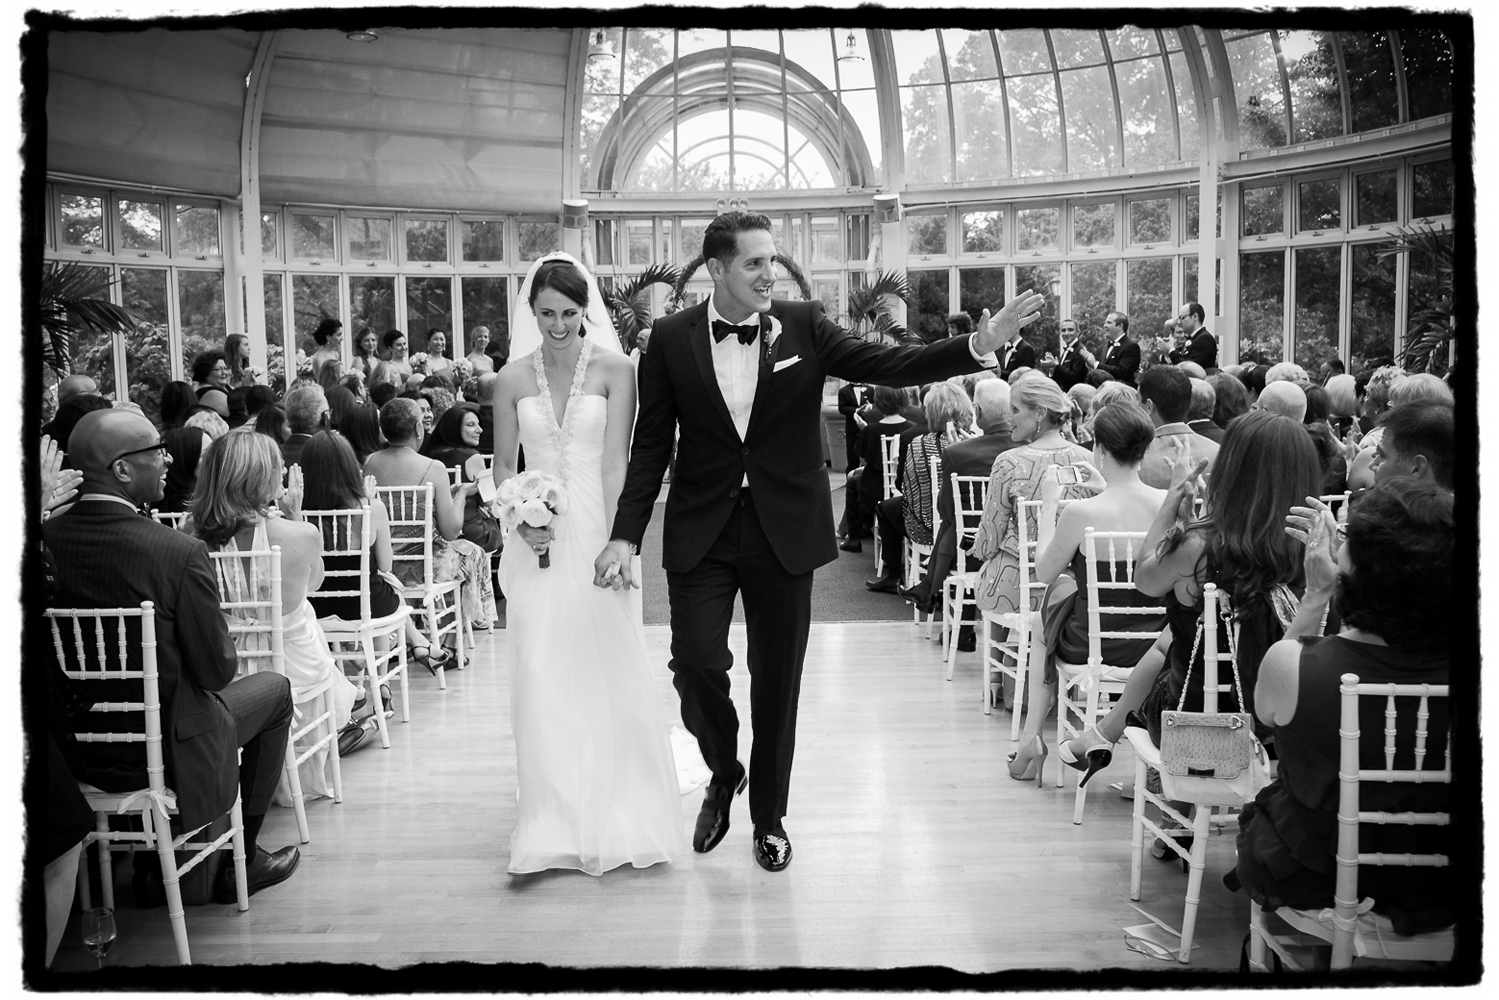 Jessica and Stephen wave to their guests as they walk back down the aisle in The Palm House at Brooklyn Botanic Garden.